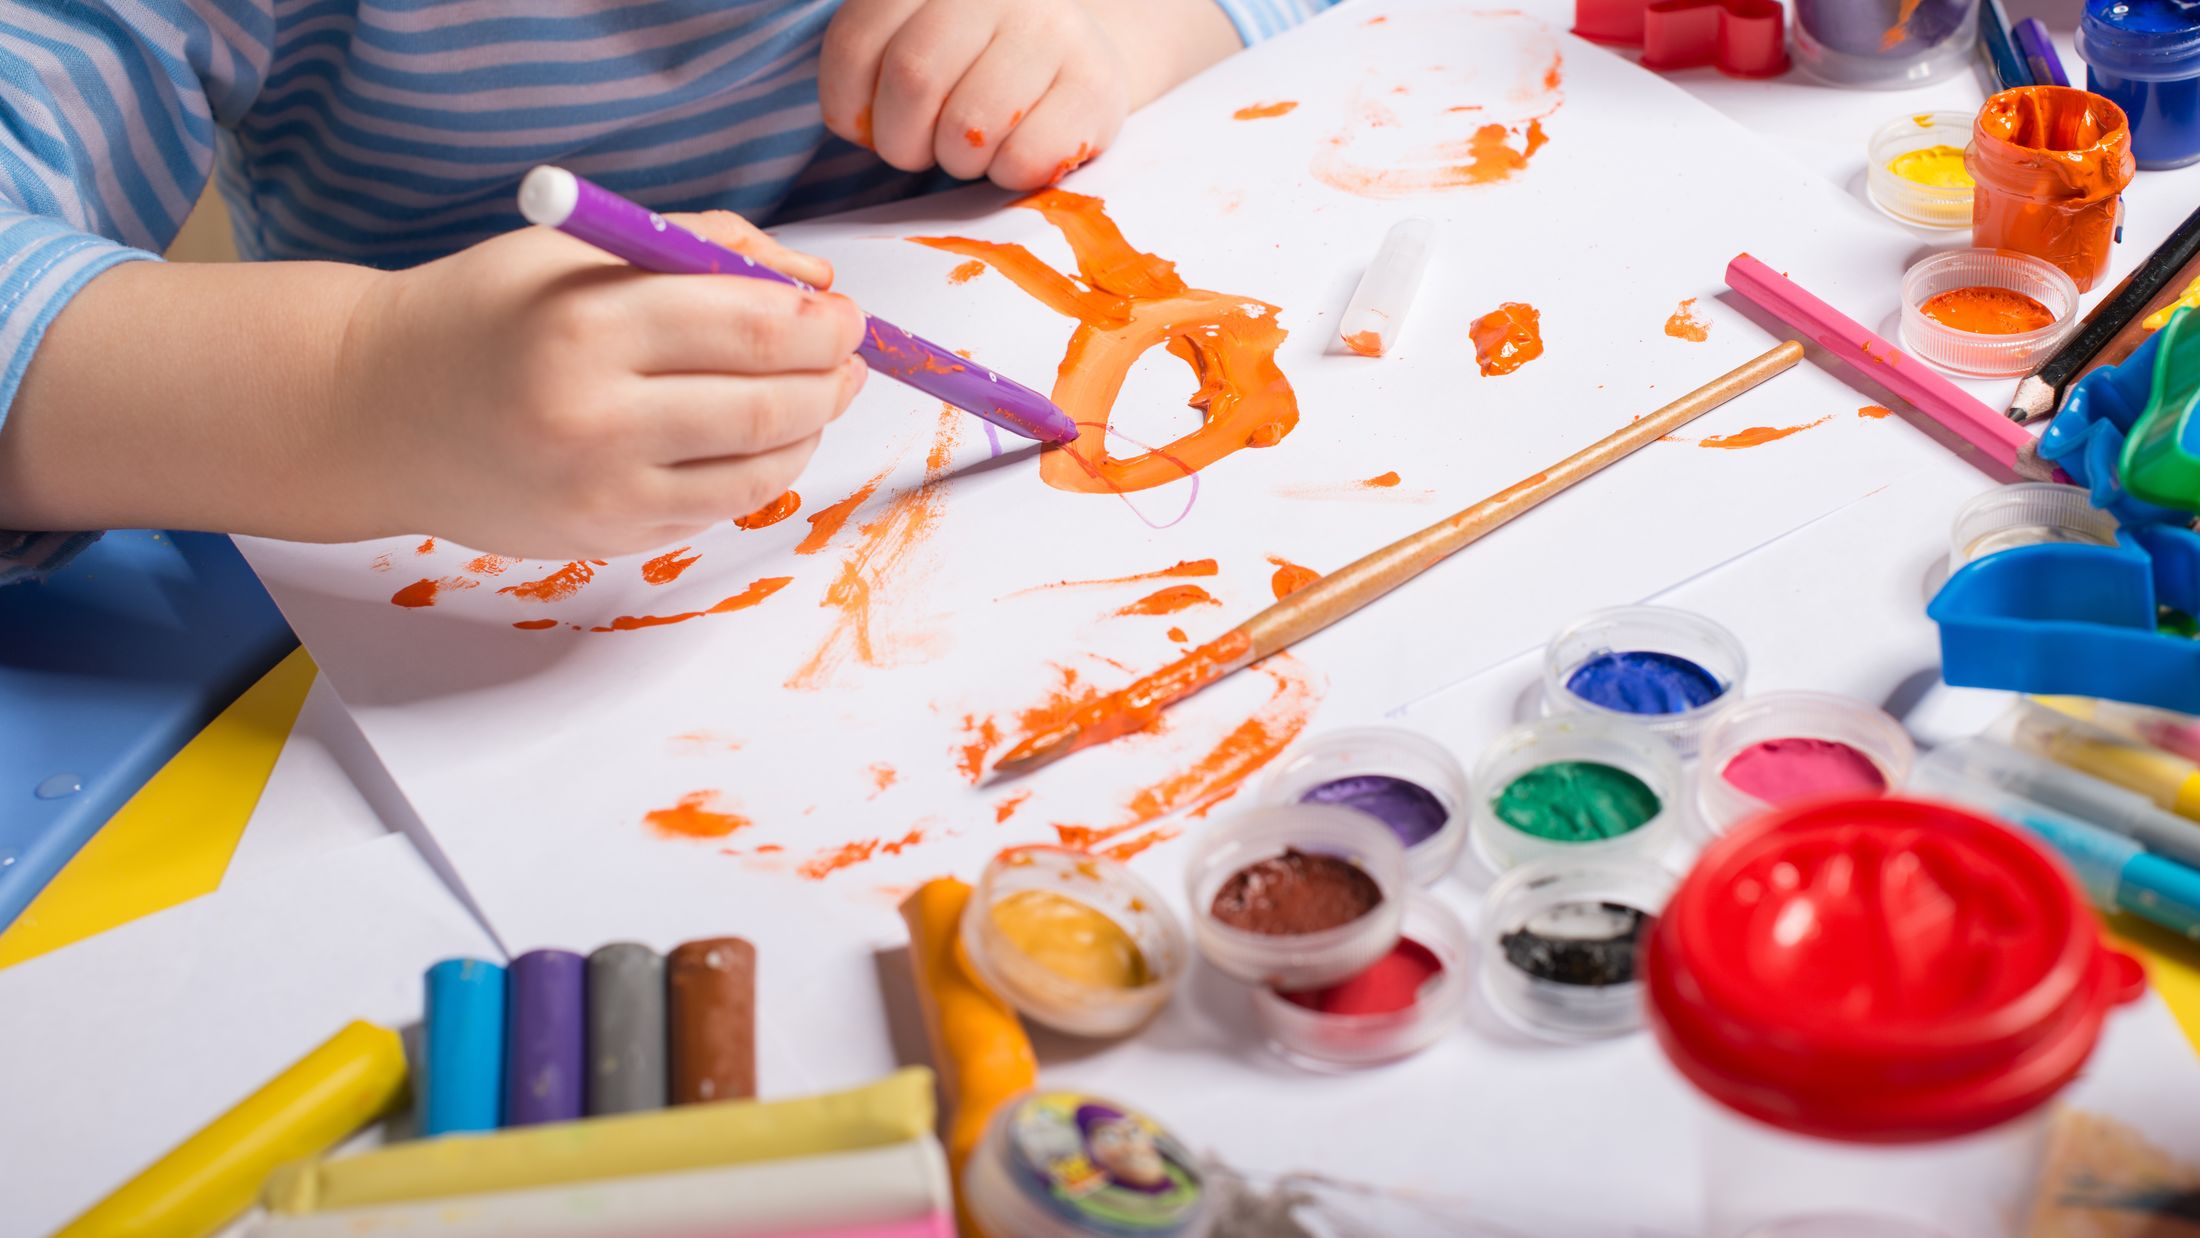 Hands of painting little boy and the table for creativity; Shutterstock ID 132261485; PO: Sovereign